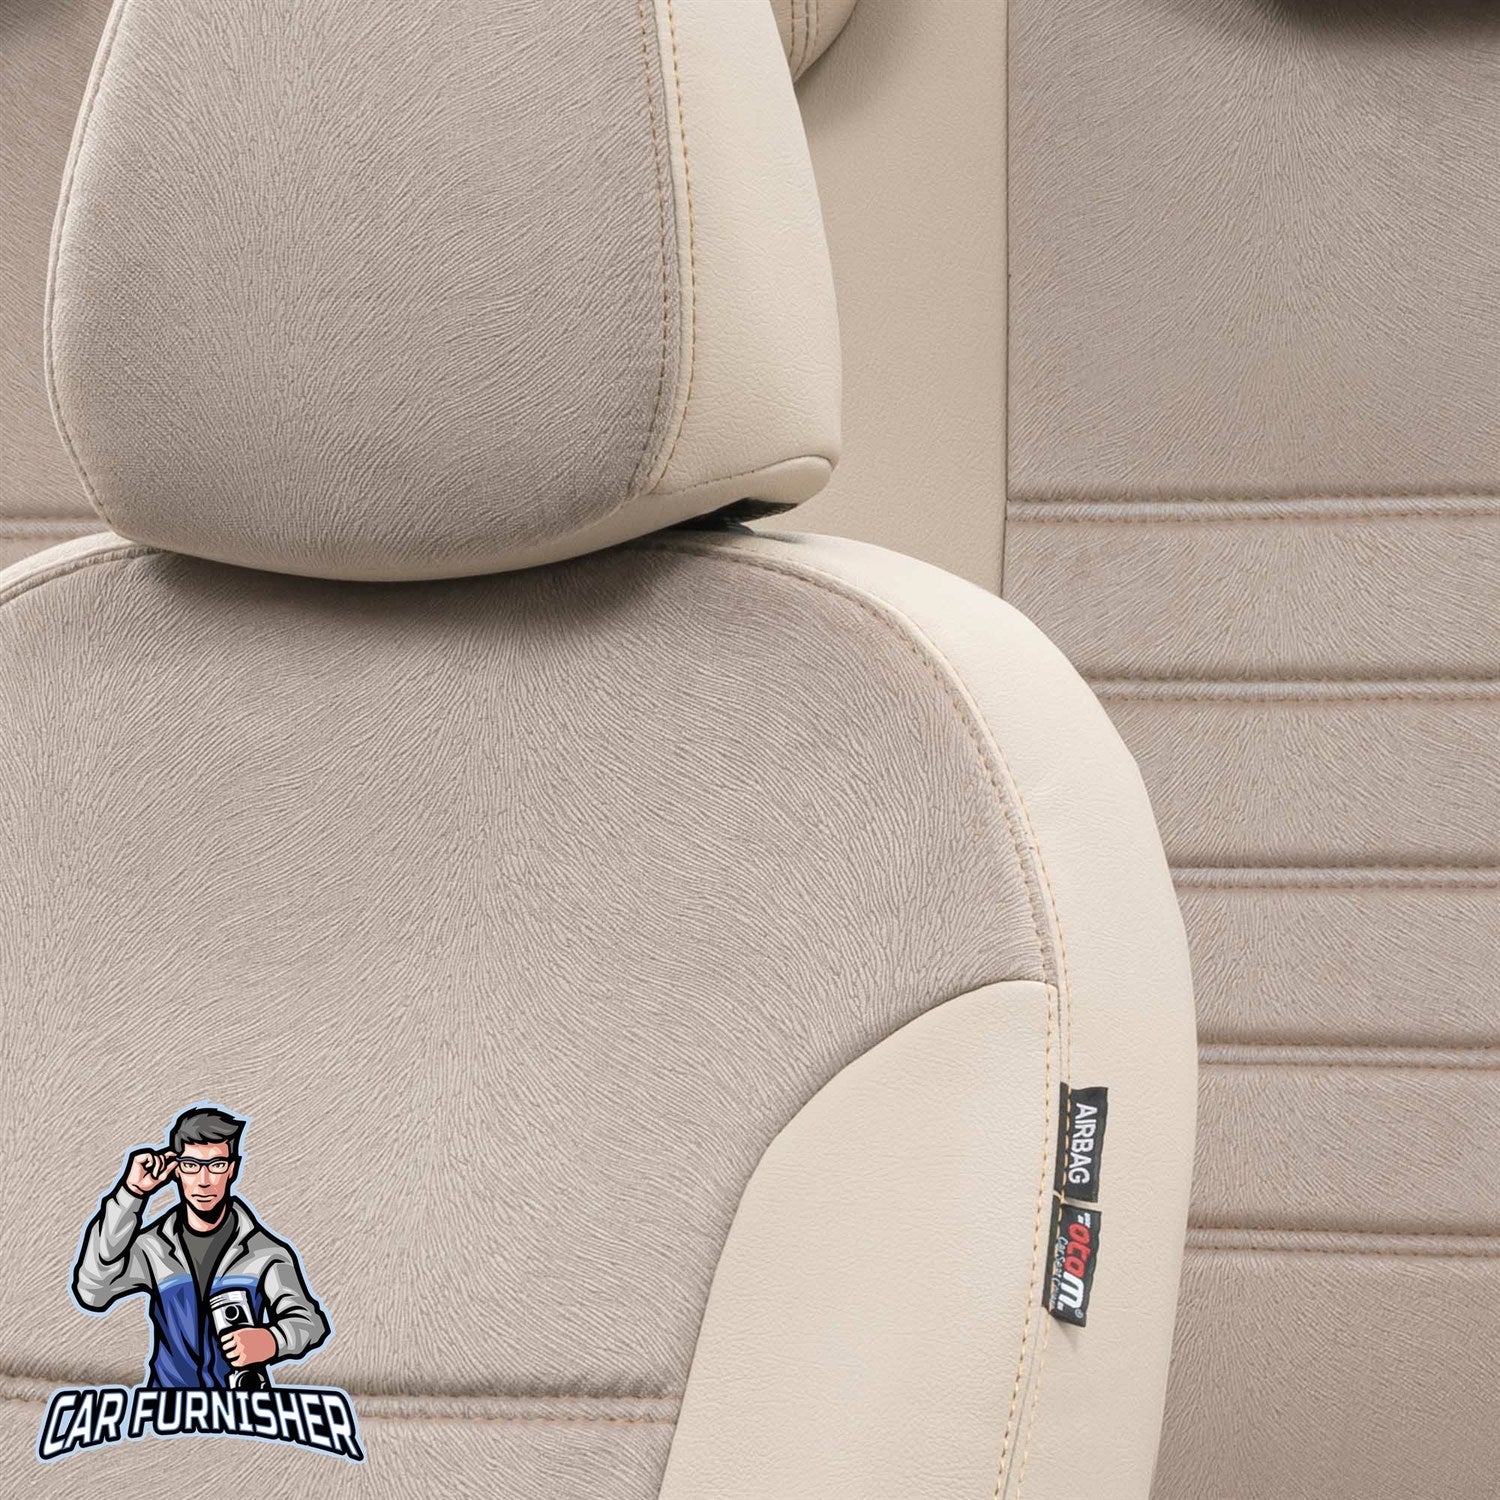 Mercedes E Class Seat Covers London Foal Feather Design Beige Leather & Foal Feather